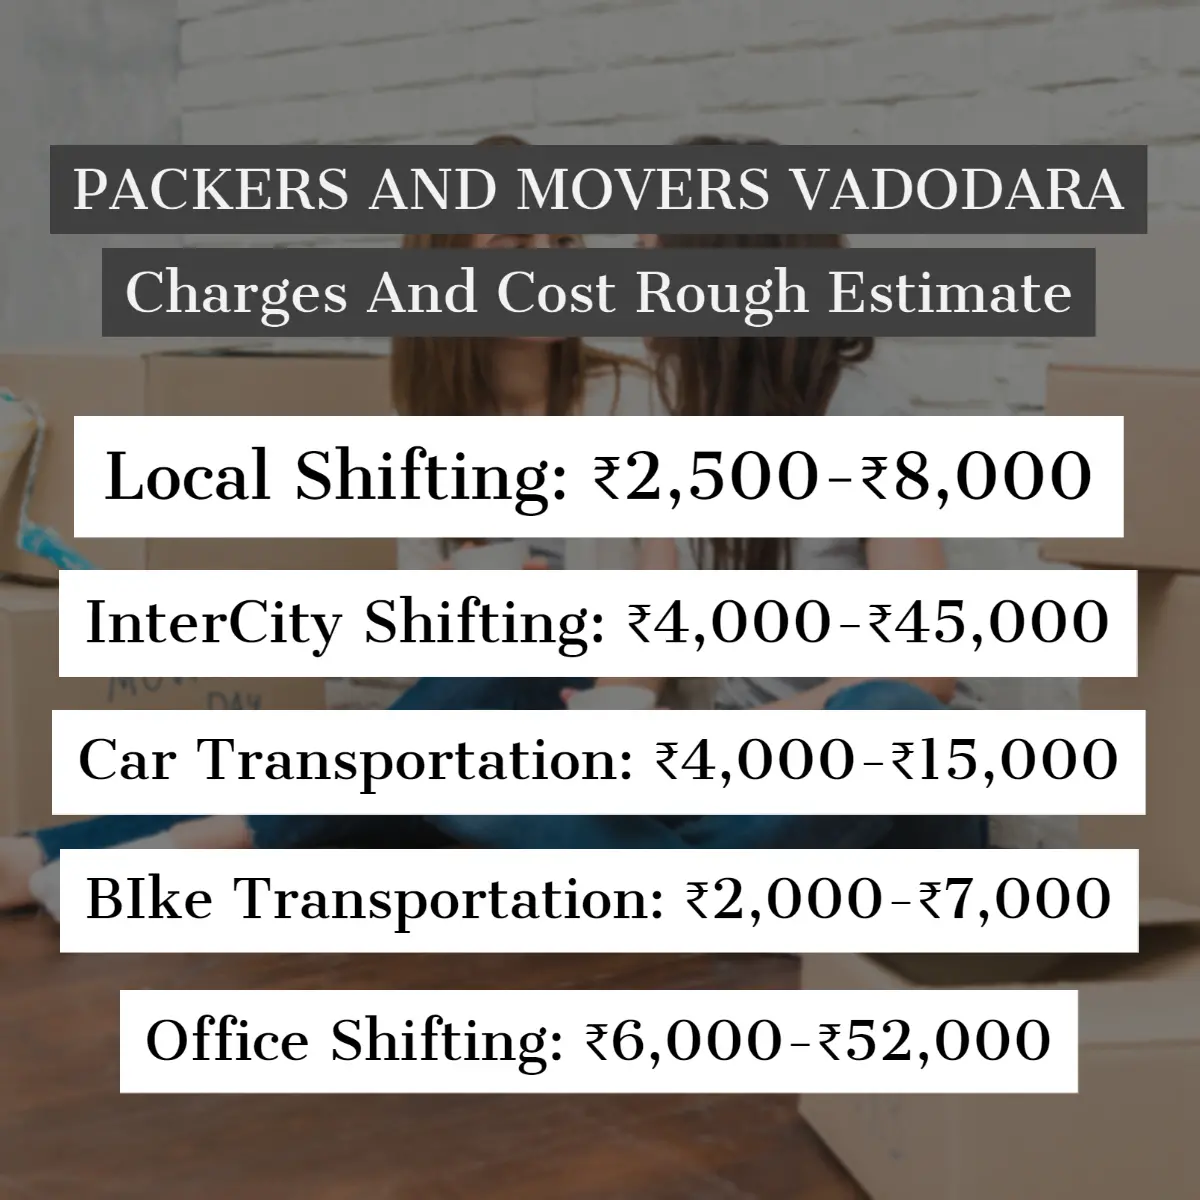 Packers and Movers Vadodara Charges